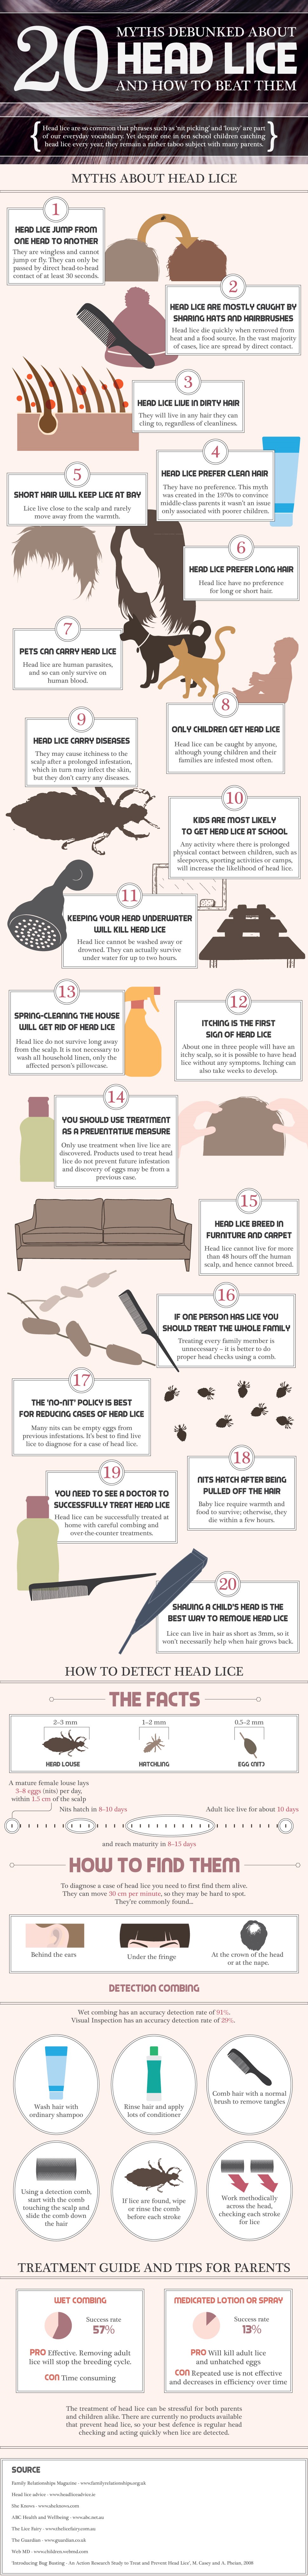 20 Myths Debunked About Head Lice and How to Beat Them Infographic ...